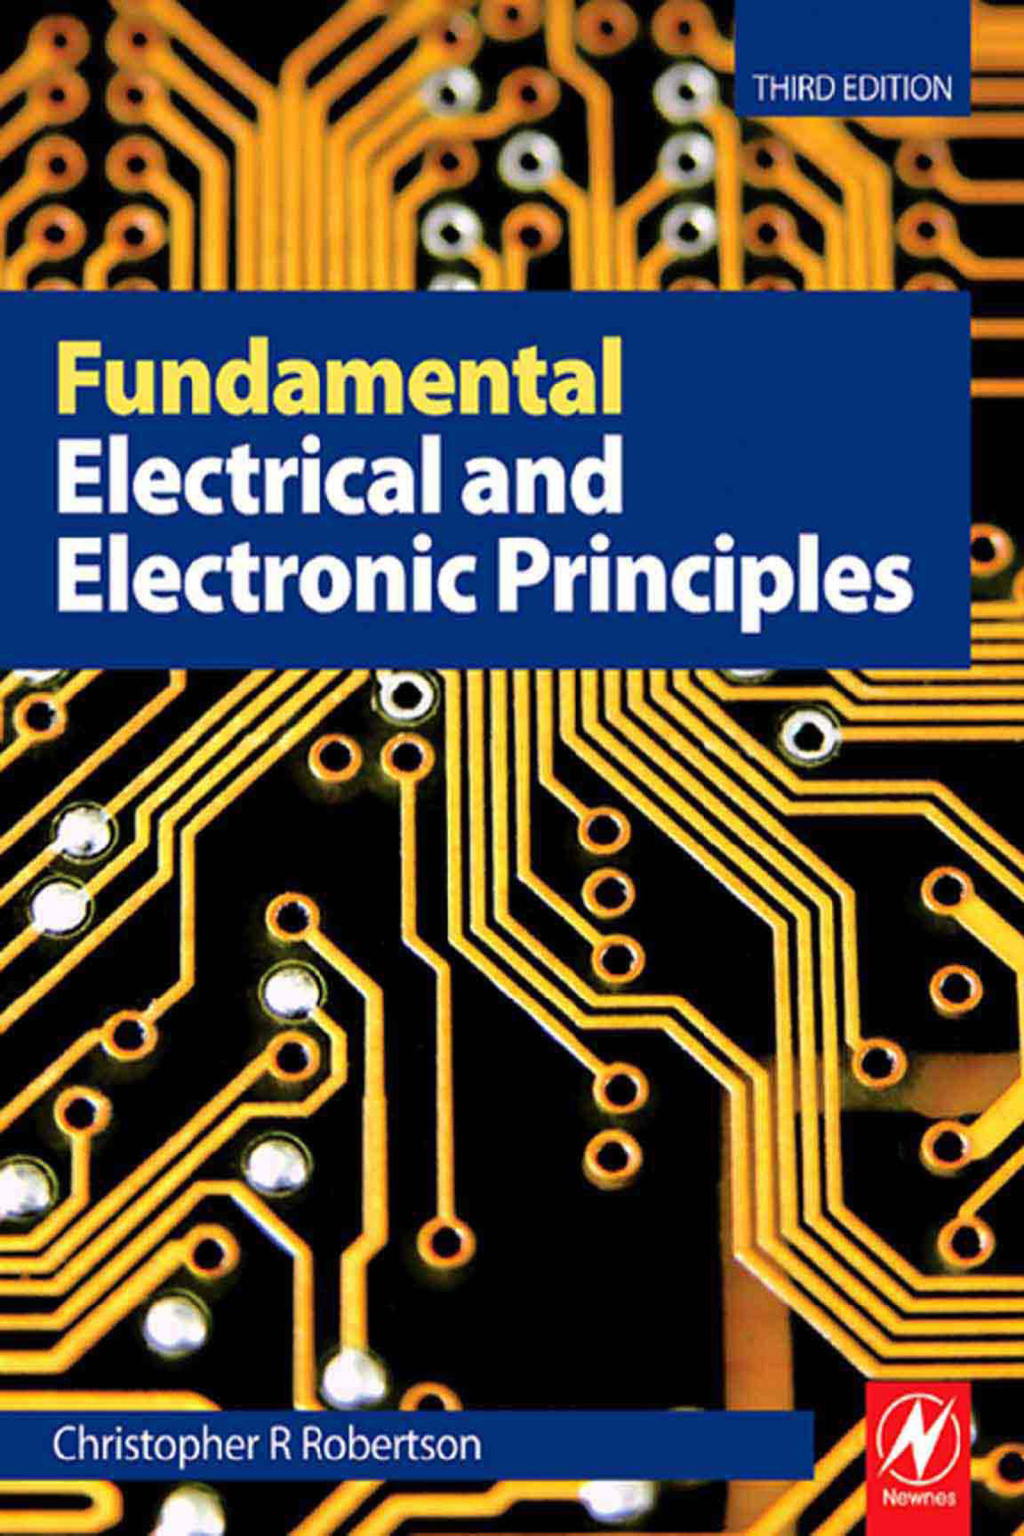 Fundamental Electrical and Electronic Principles - 3rd Edition (eBook)